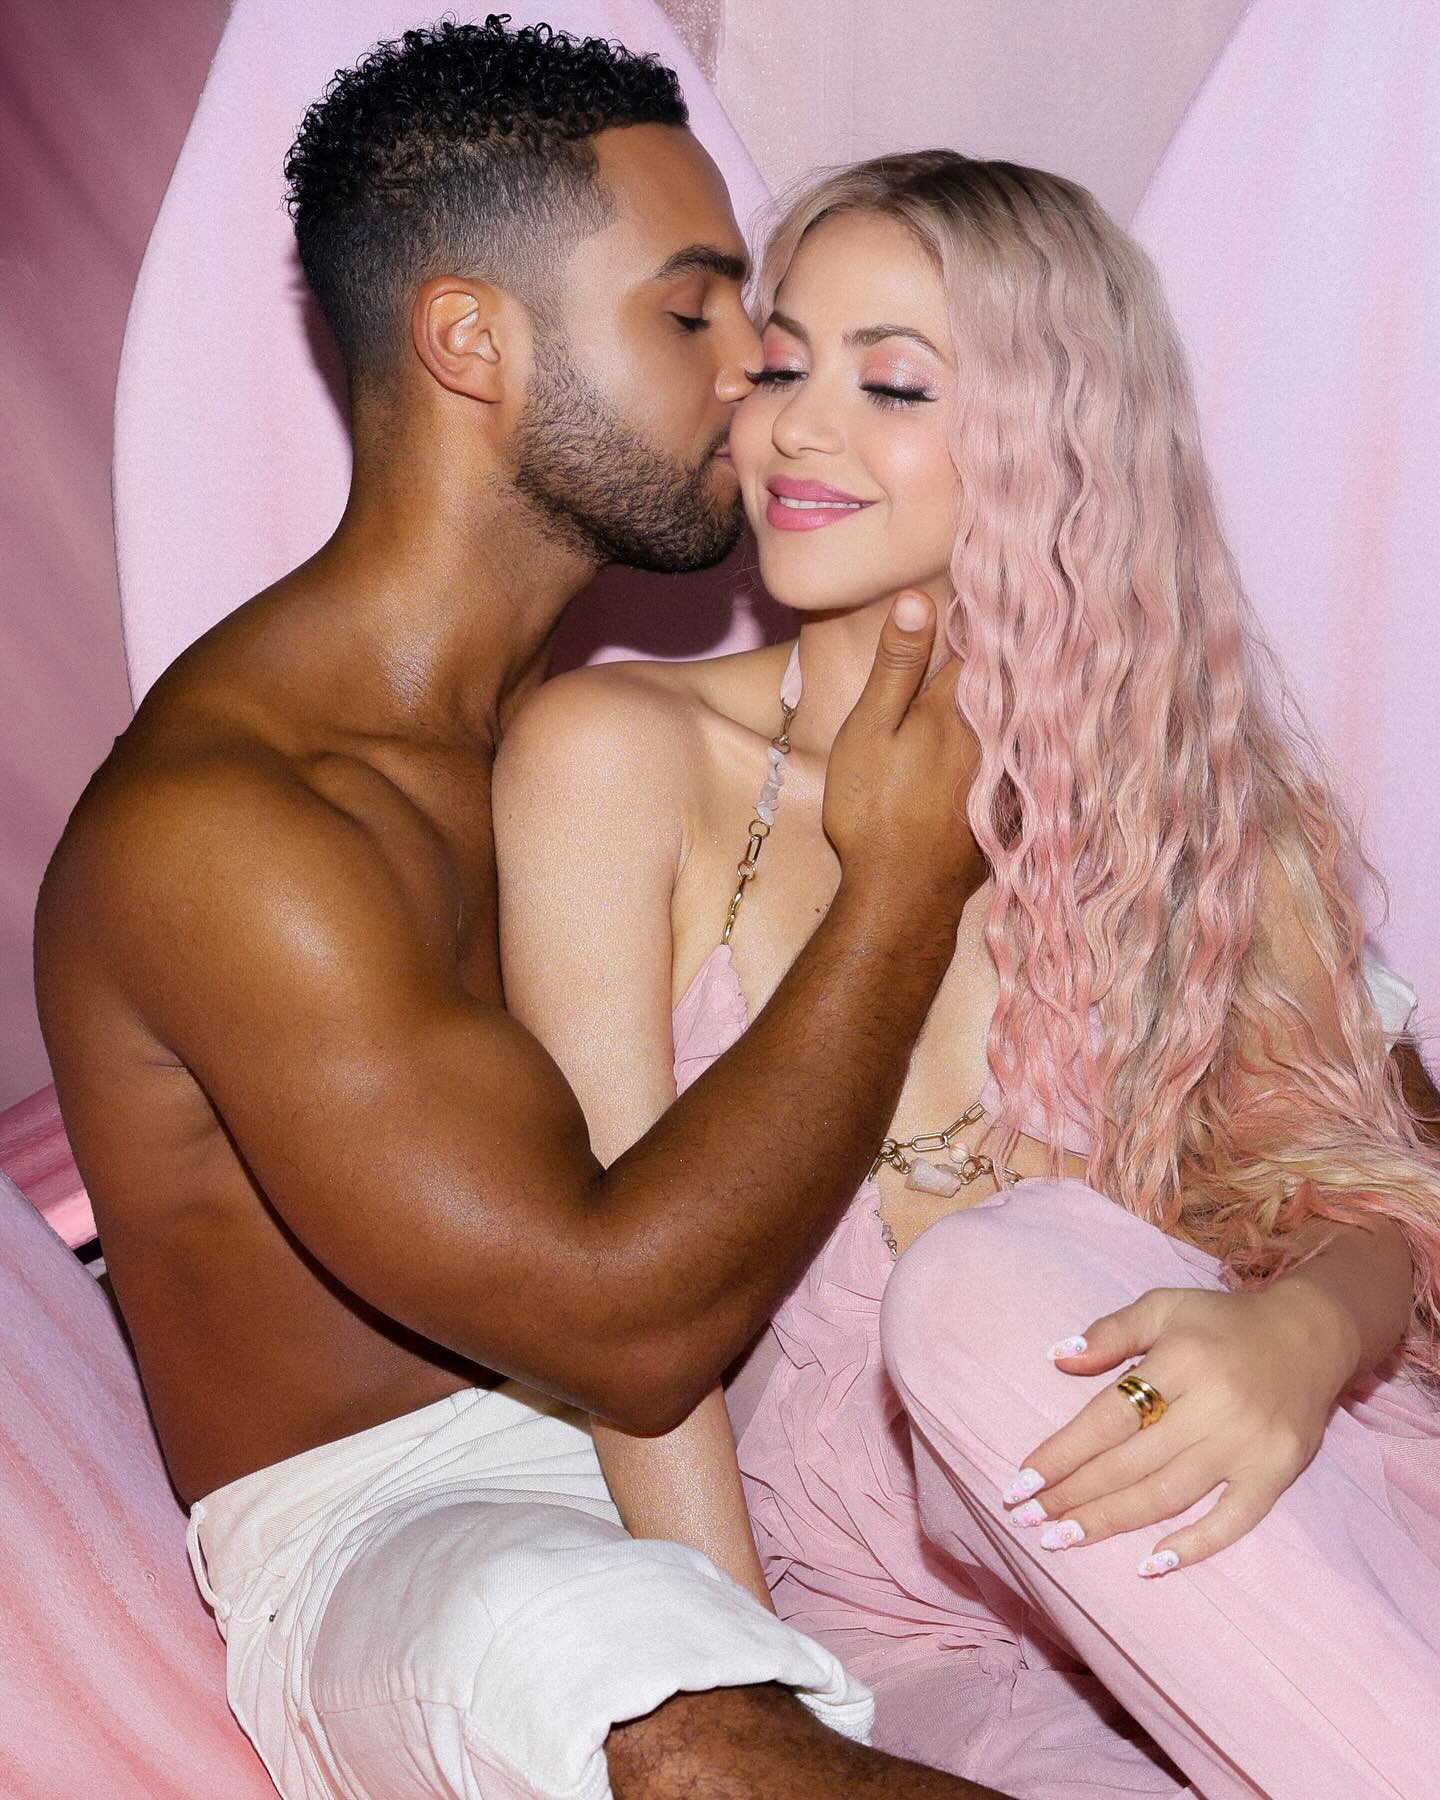 Shakira Looks Absolutely Gorgeous with Lucien Leon in latest Photoshoot